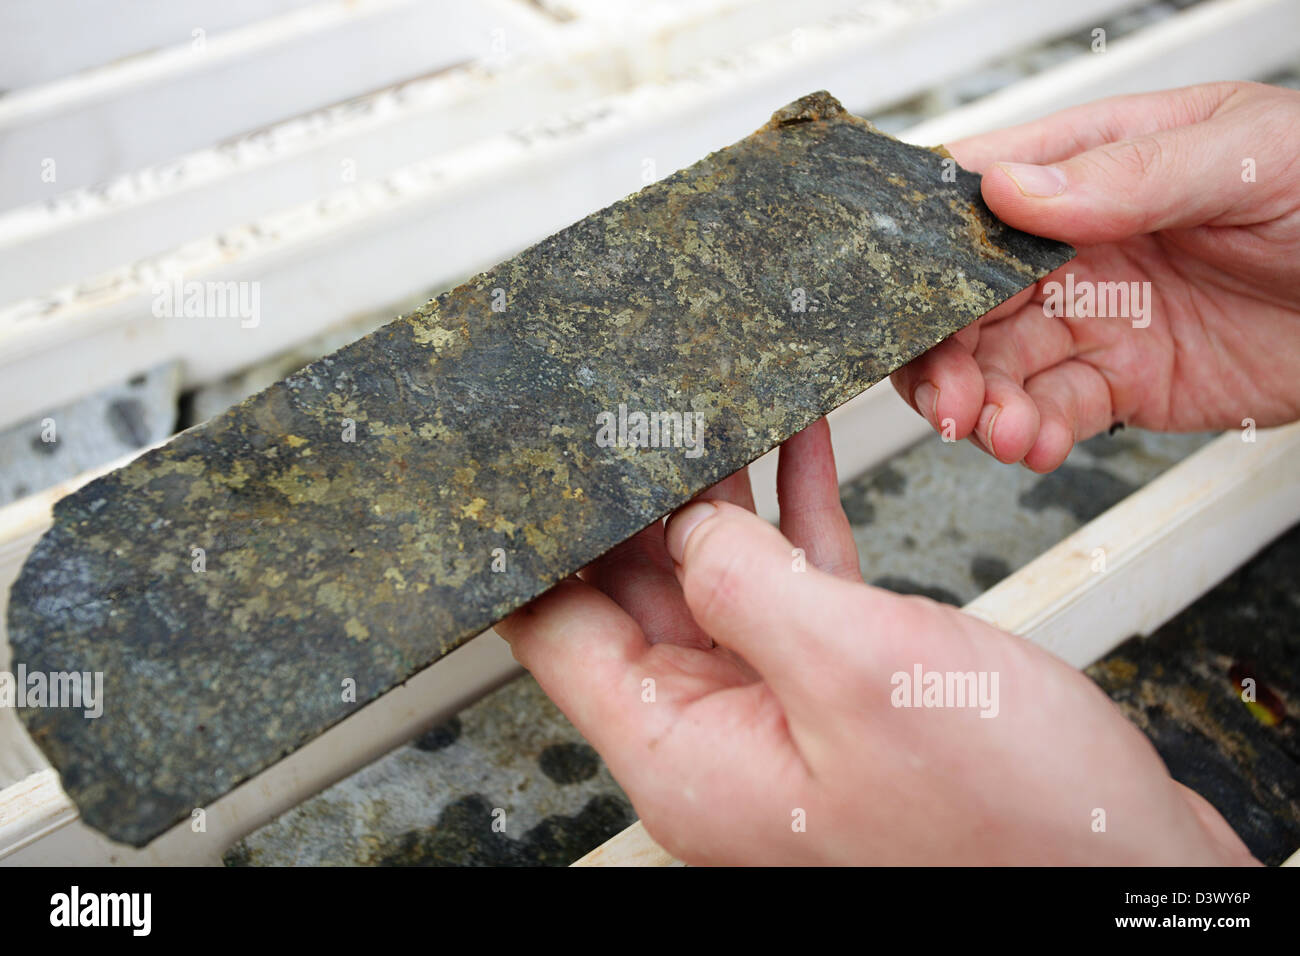 Hands holding core sample drilled to estimate copper levels Stock Photo